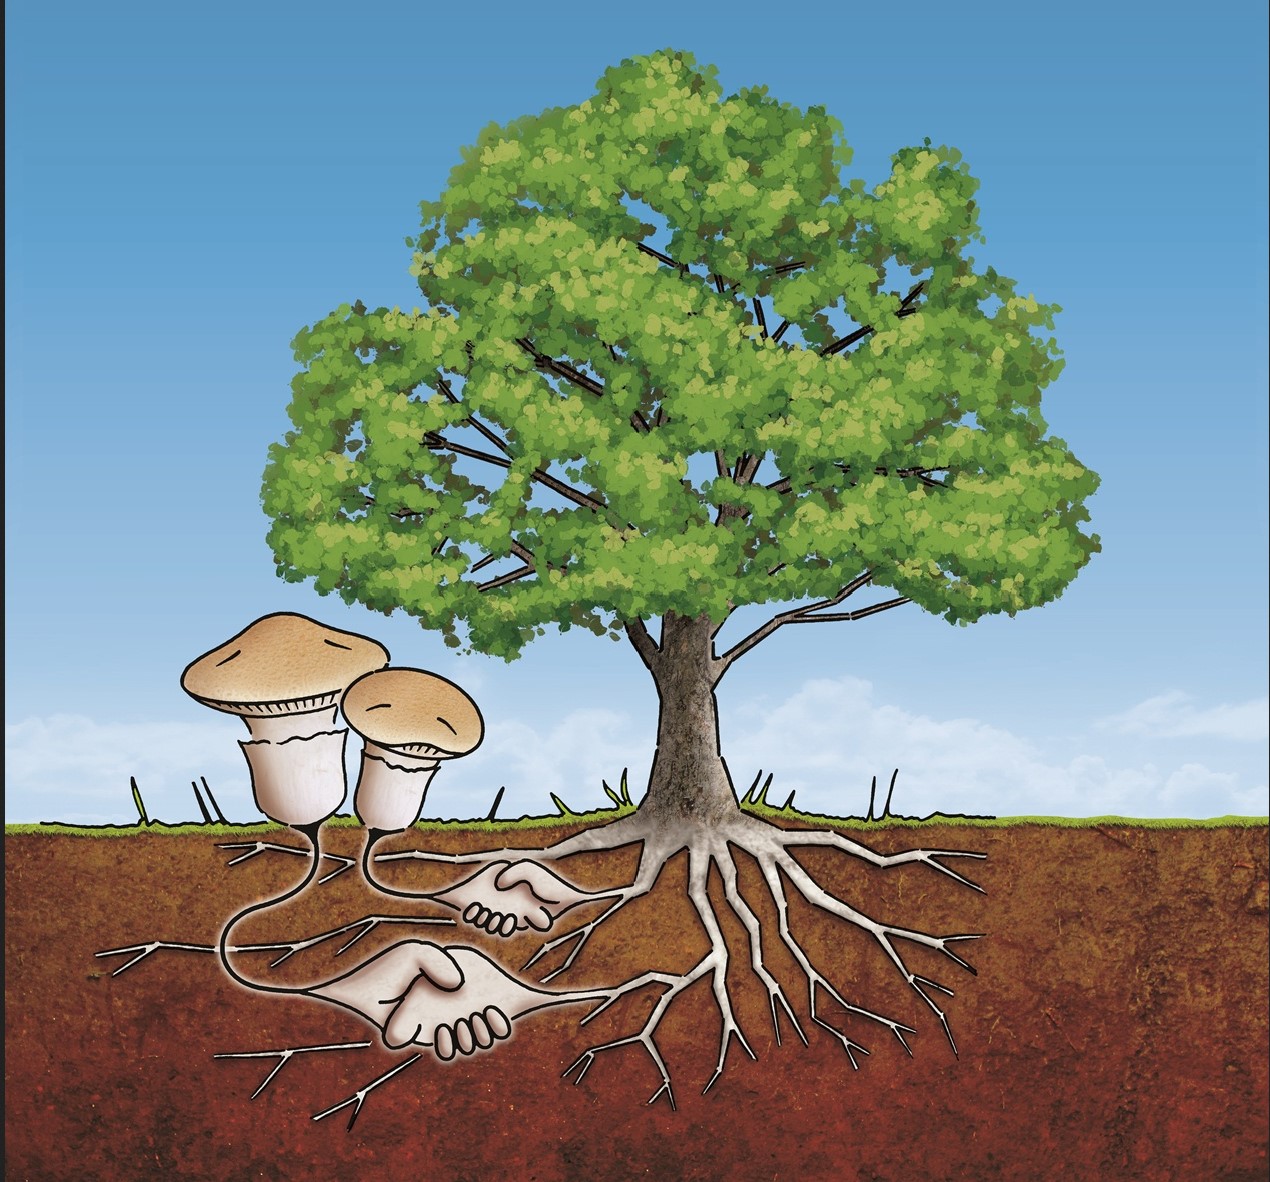 An illustration of a tree and mushrooms with the roots